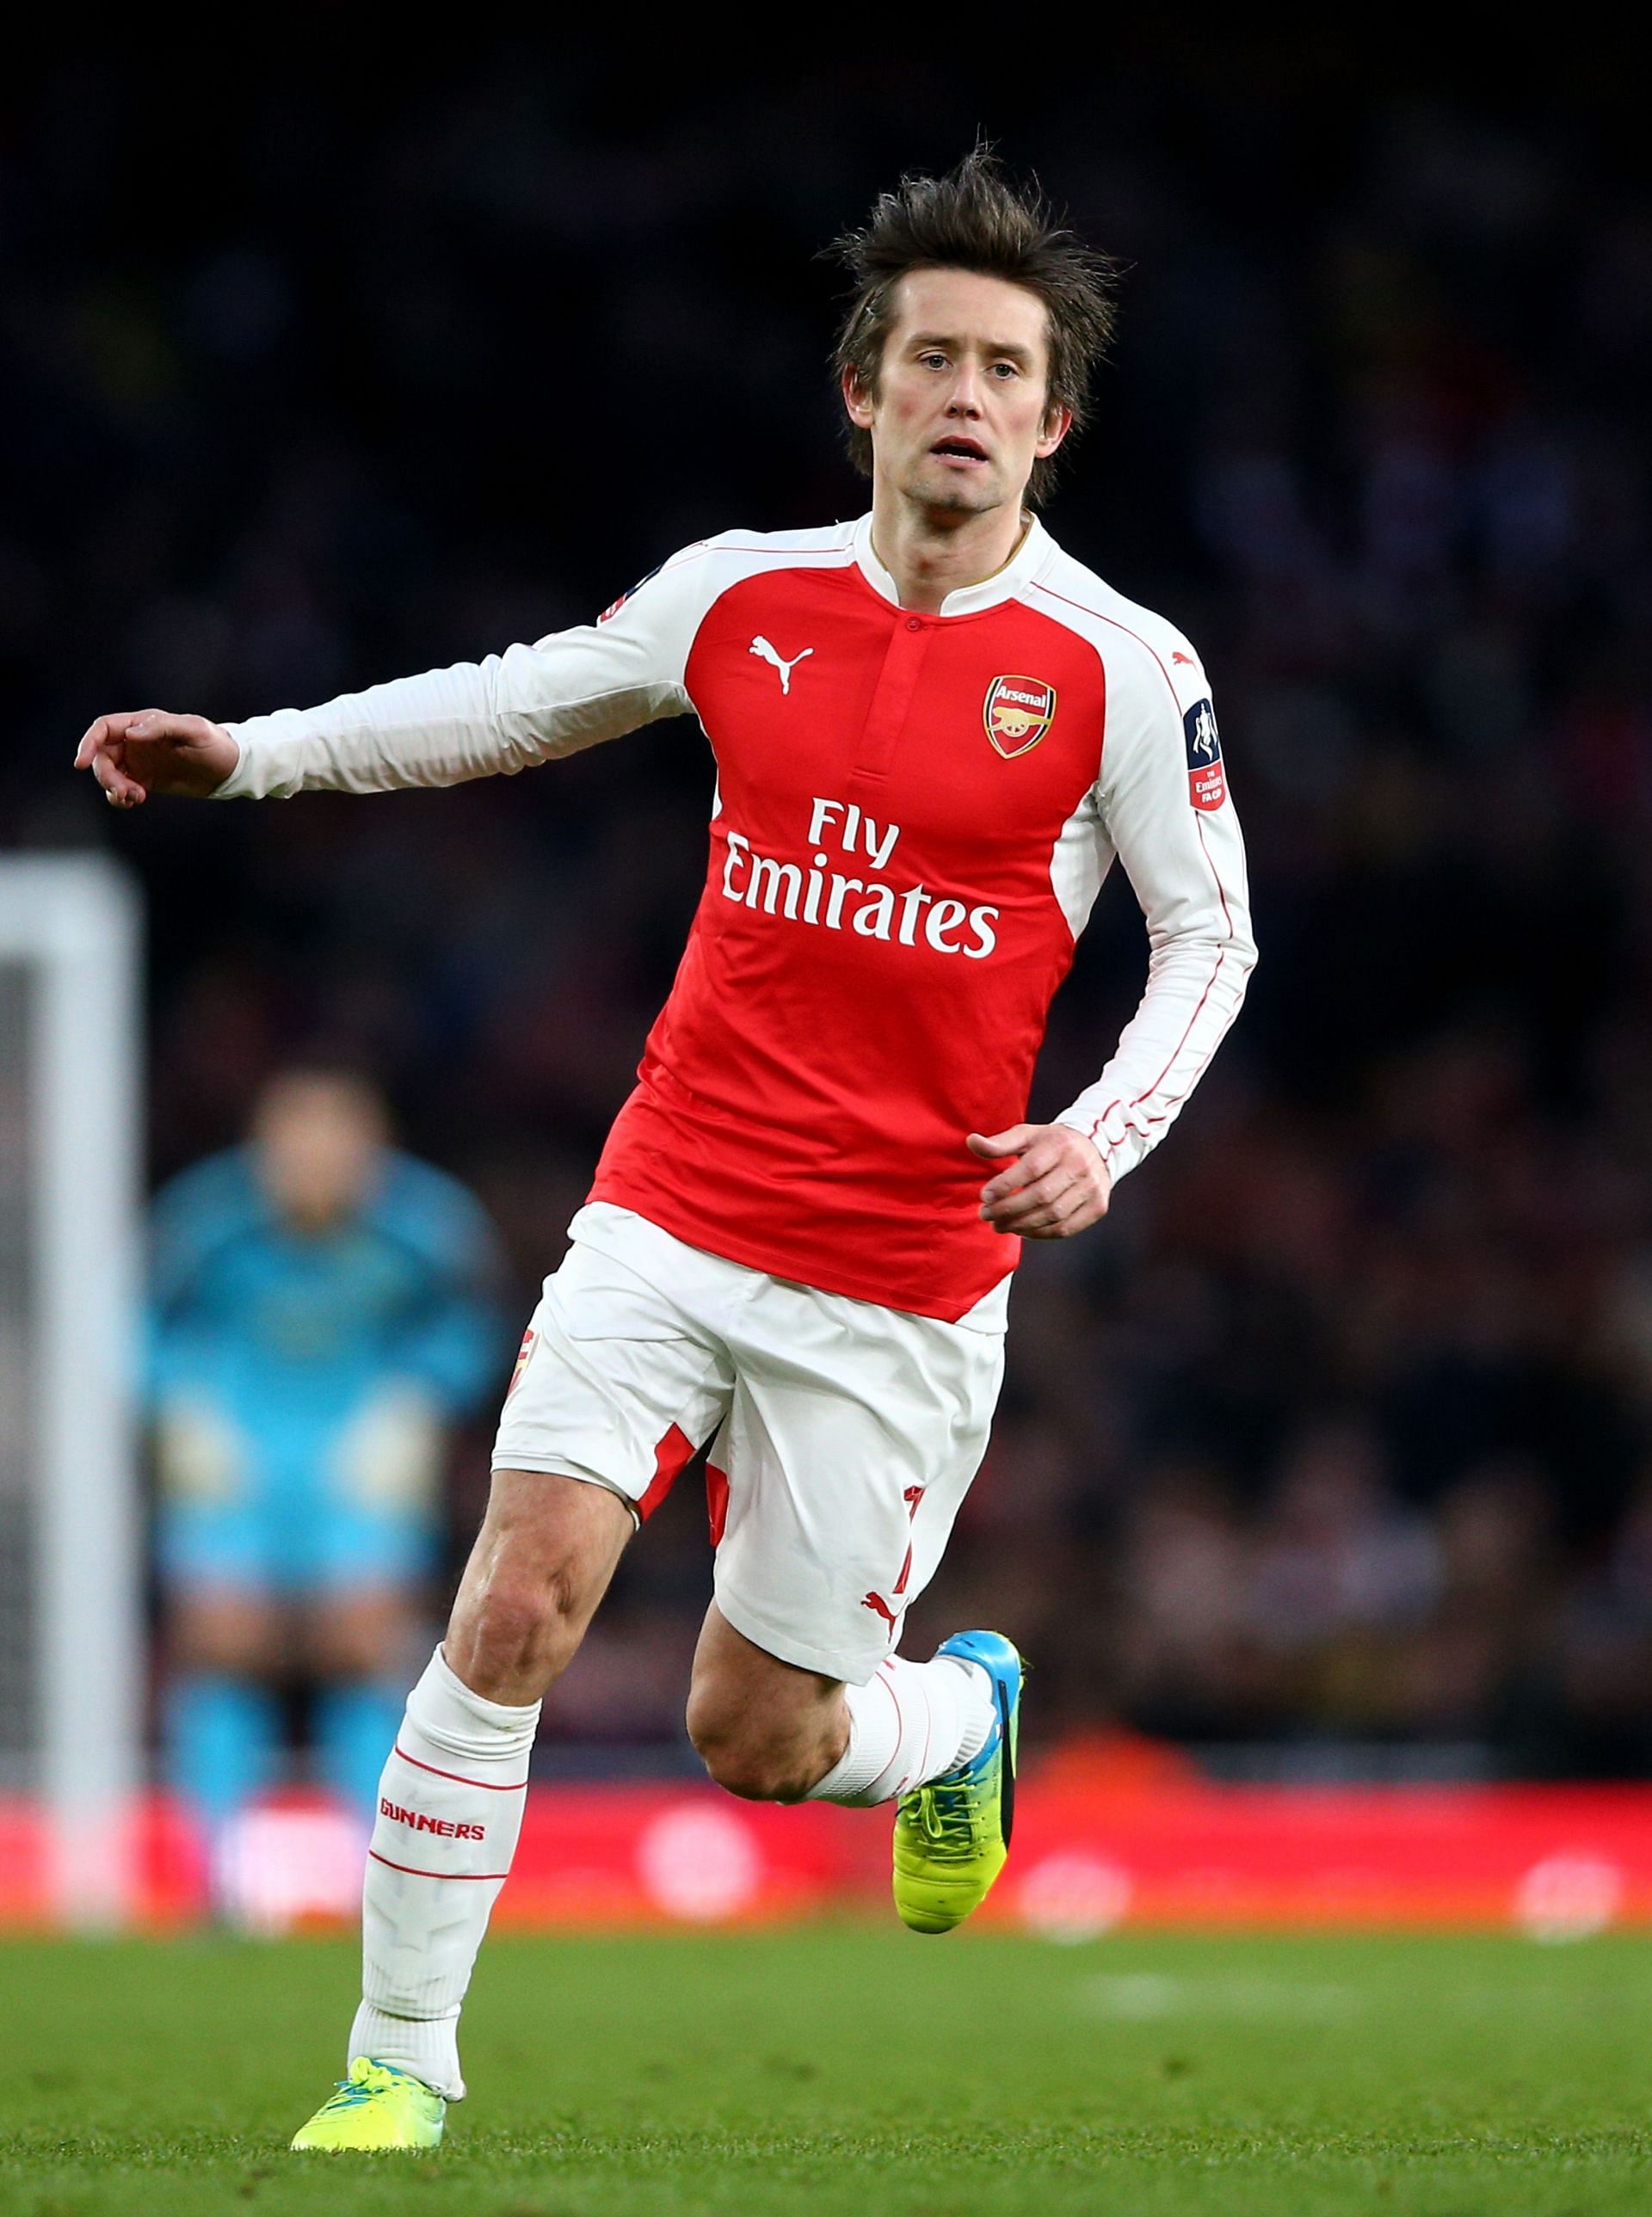 Rosicky was a technically gifted playmaker